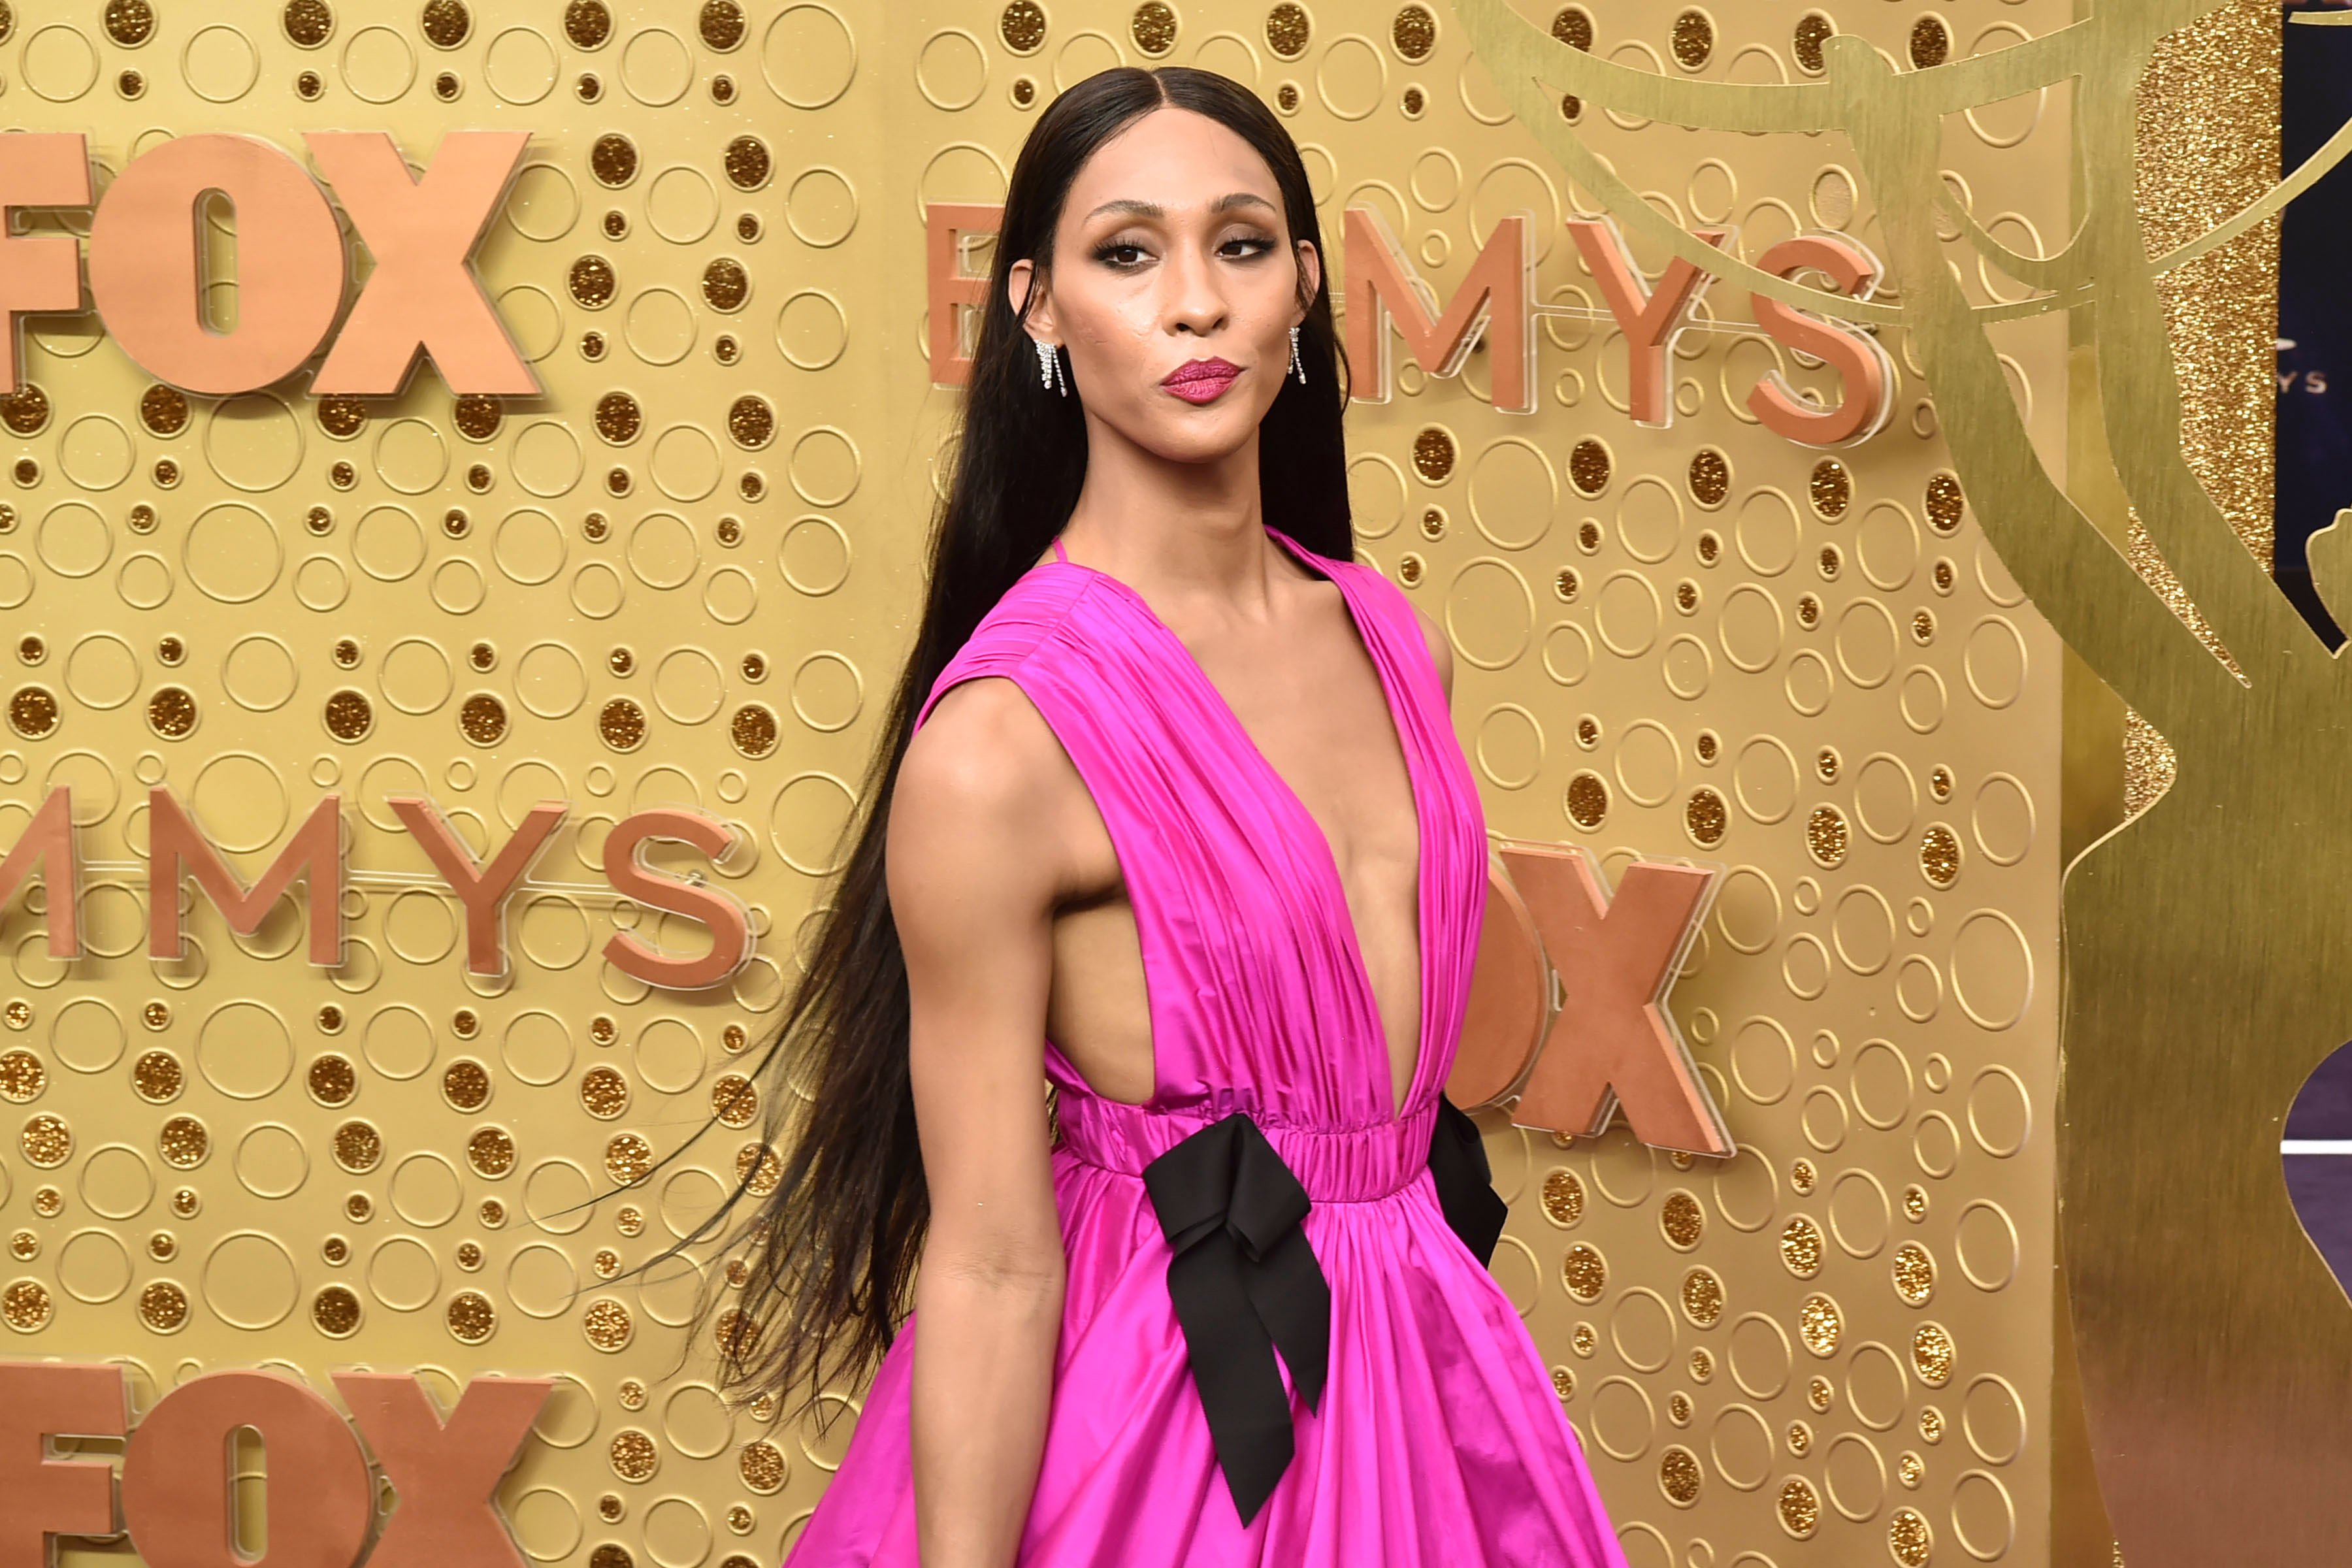 Emmys 2021: What Is ‘Pose’ Star Mj Rodriguez’s Net Worth?